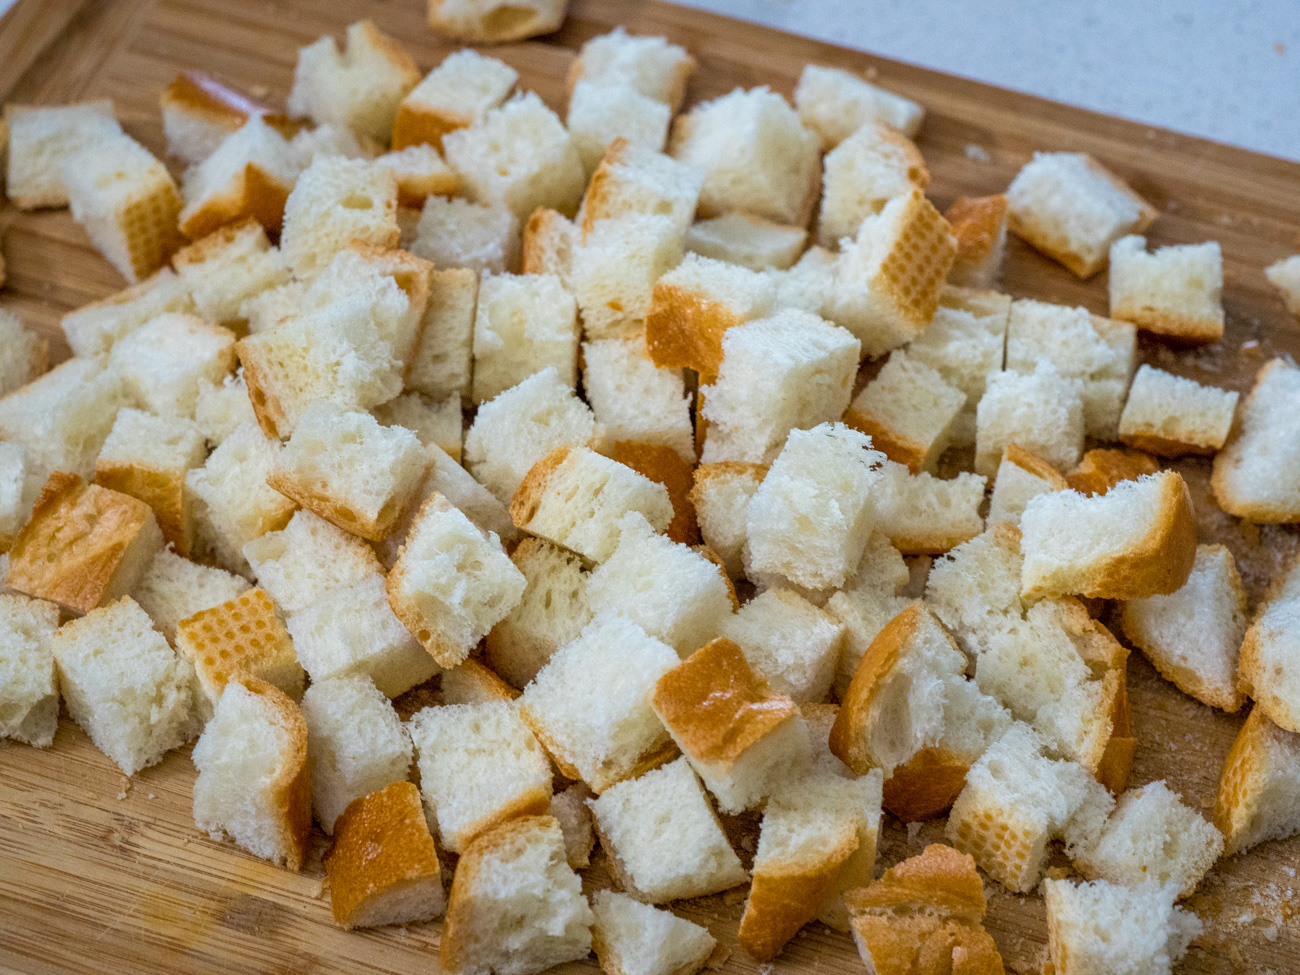 bread cubes for making Chocolate Cinnamon Bread Pudding